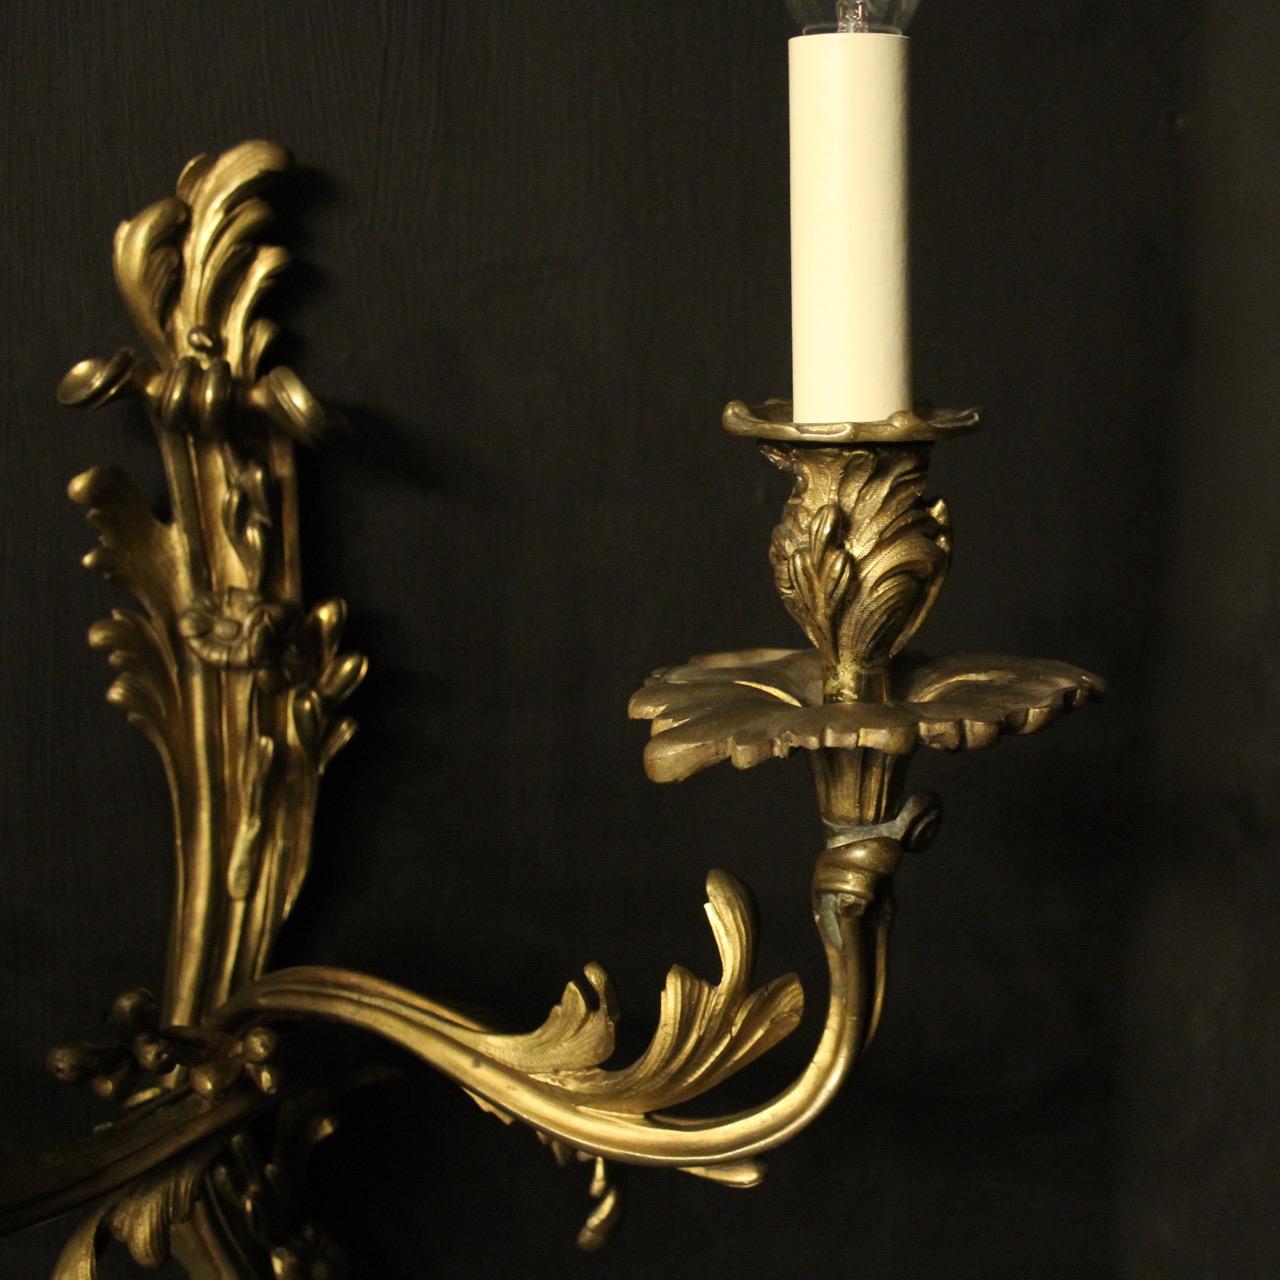 antique candle wall sconces